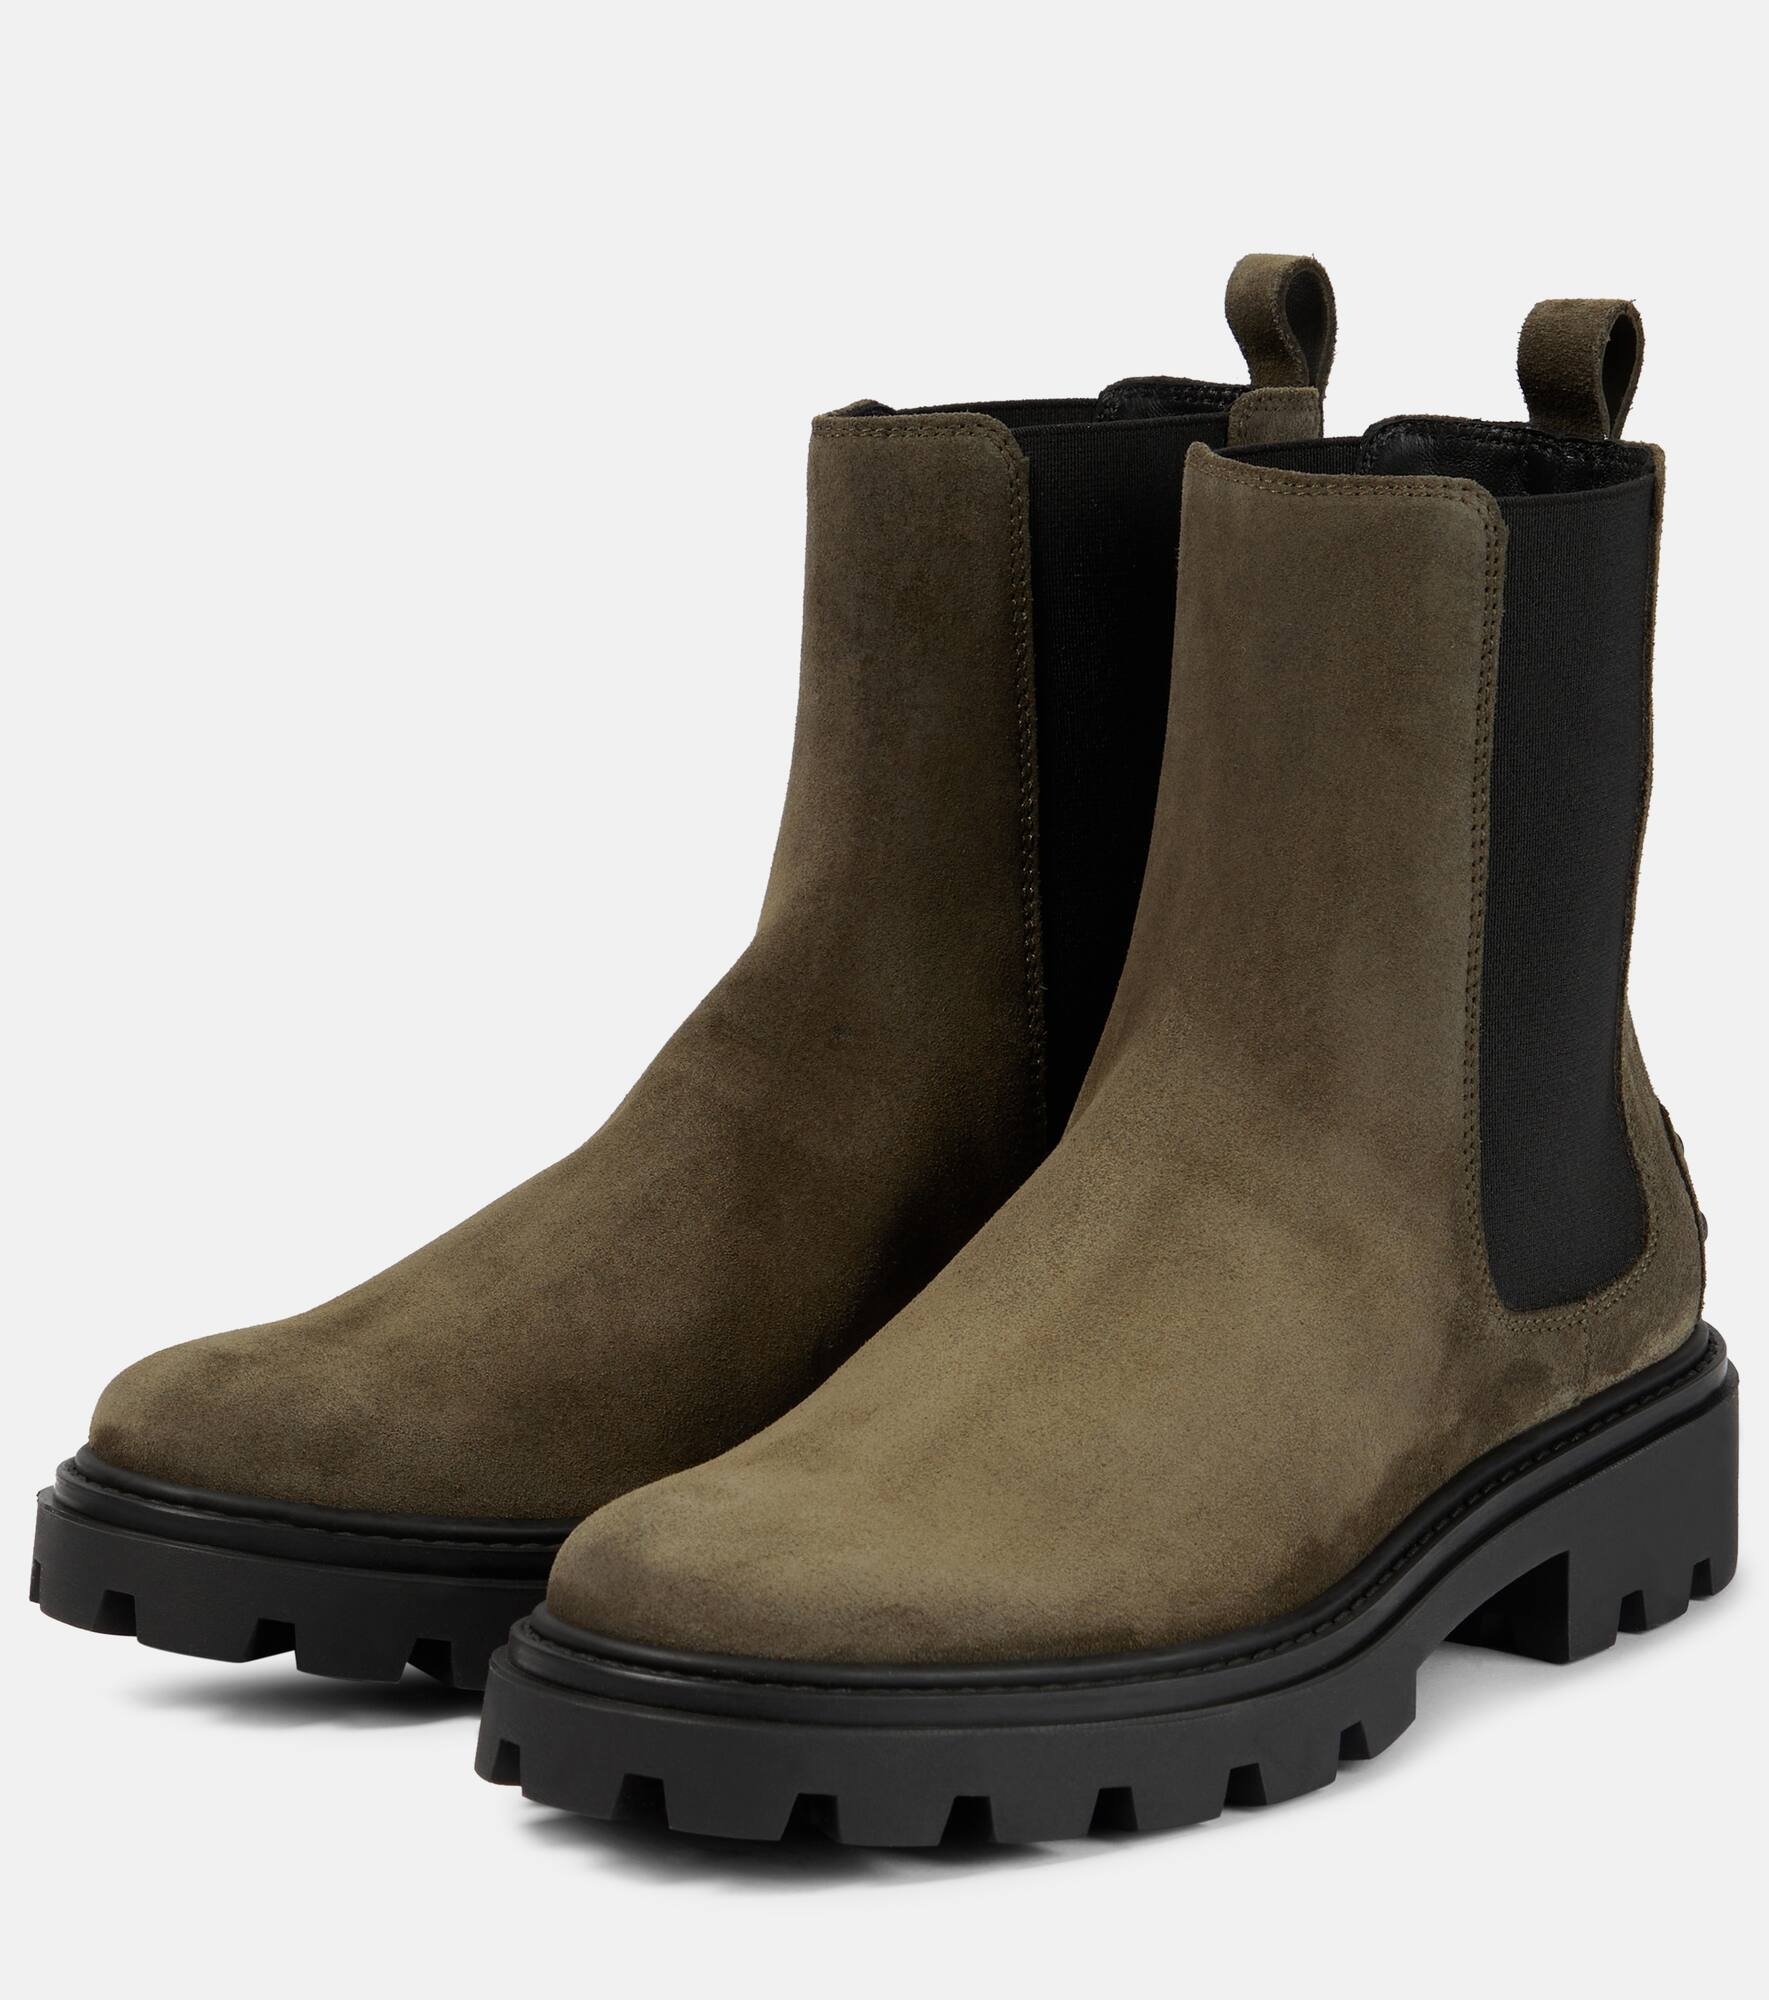 Suede Chelsea boots - 5